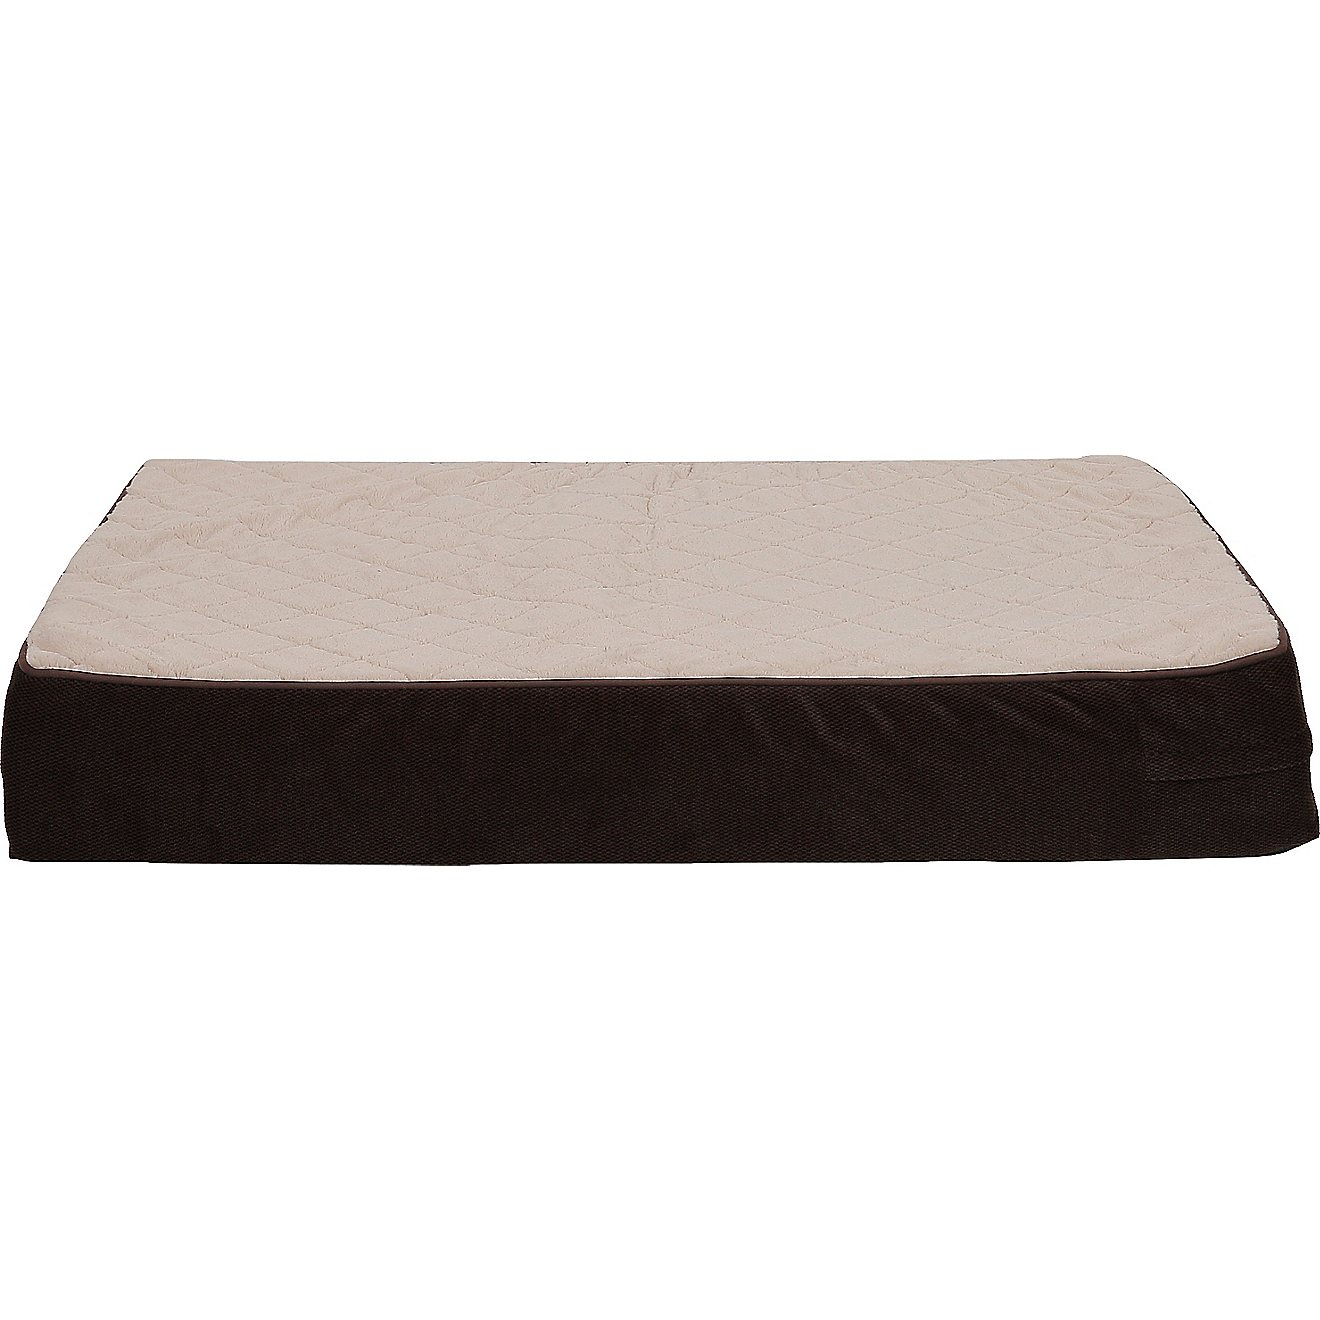 Dallas Manufacturing Company 30 in x 40 in x 6 in Orthopedic Pet Bed                                                             - view number 1